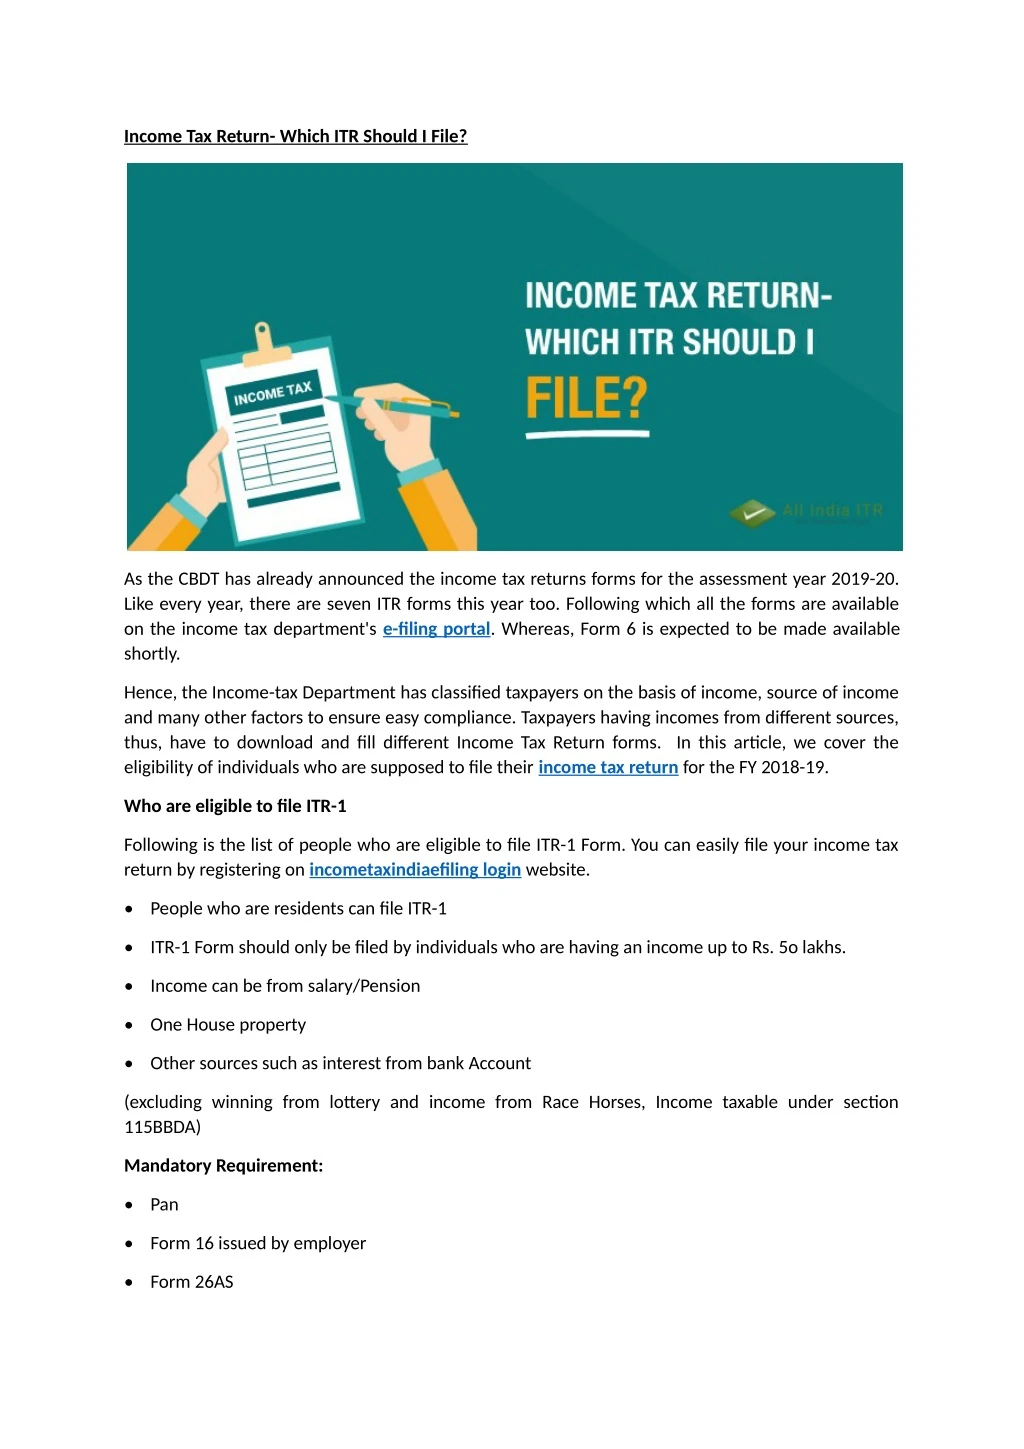 income tax return which itr should i file